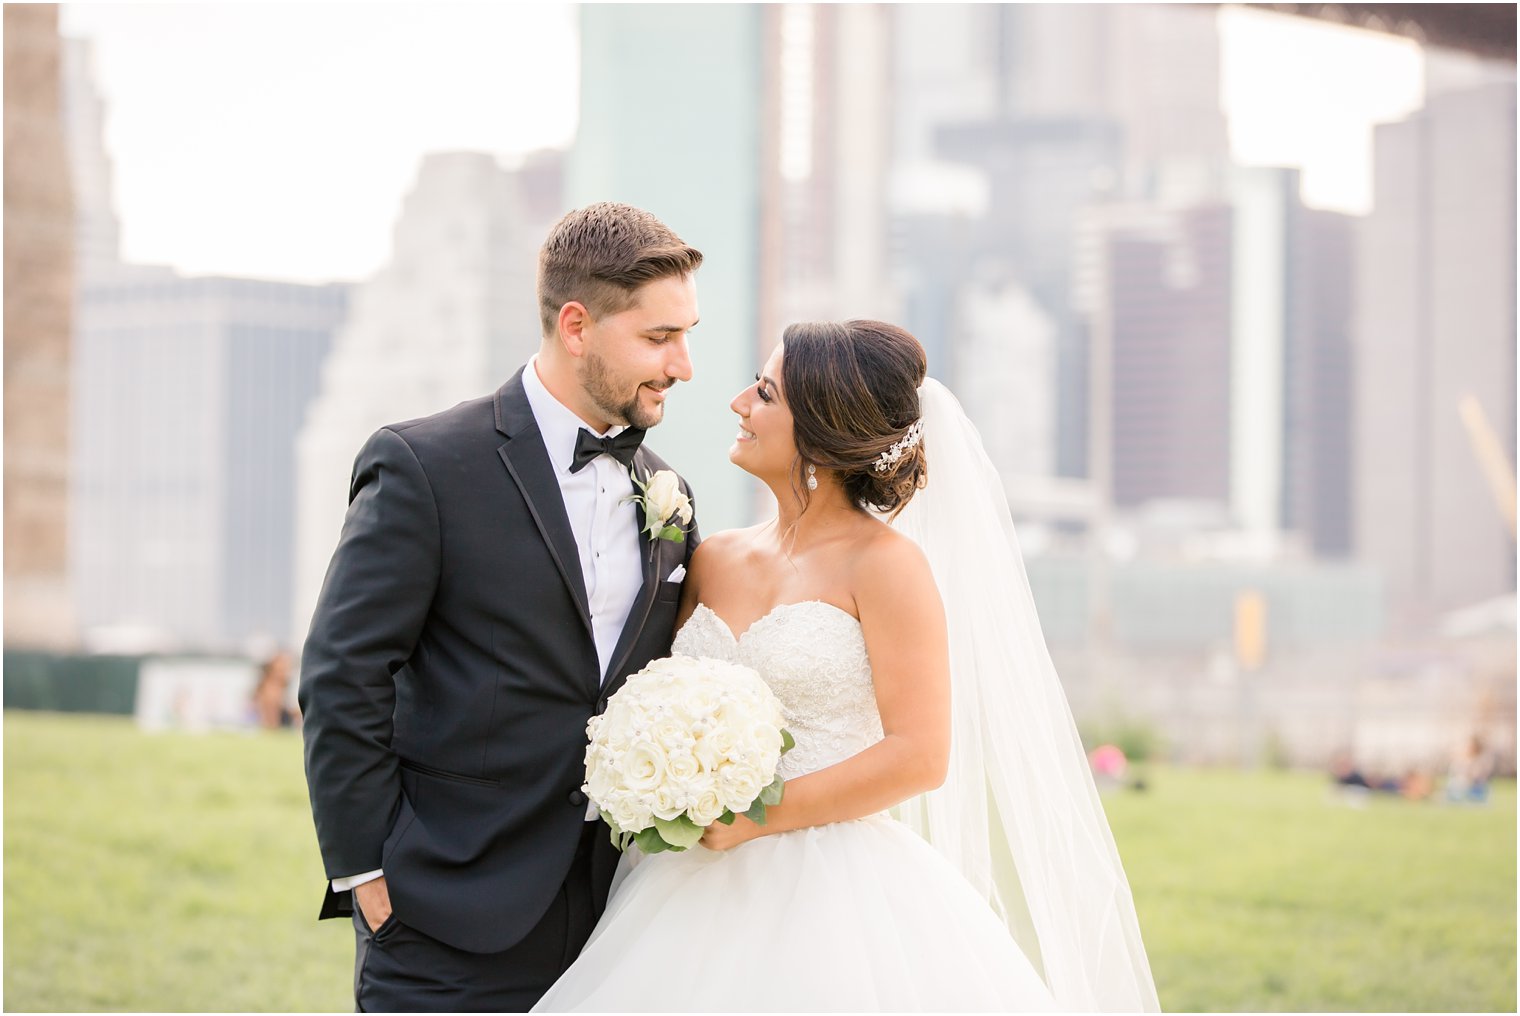 Candid photo of bride and groom at DUMBO